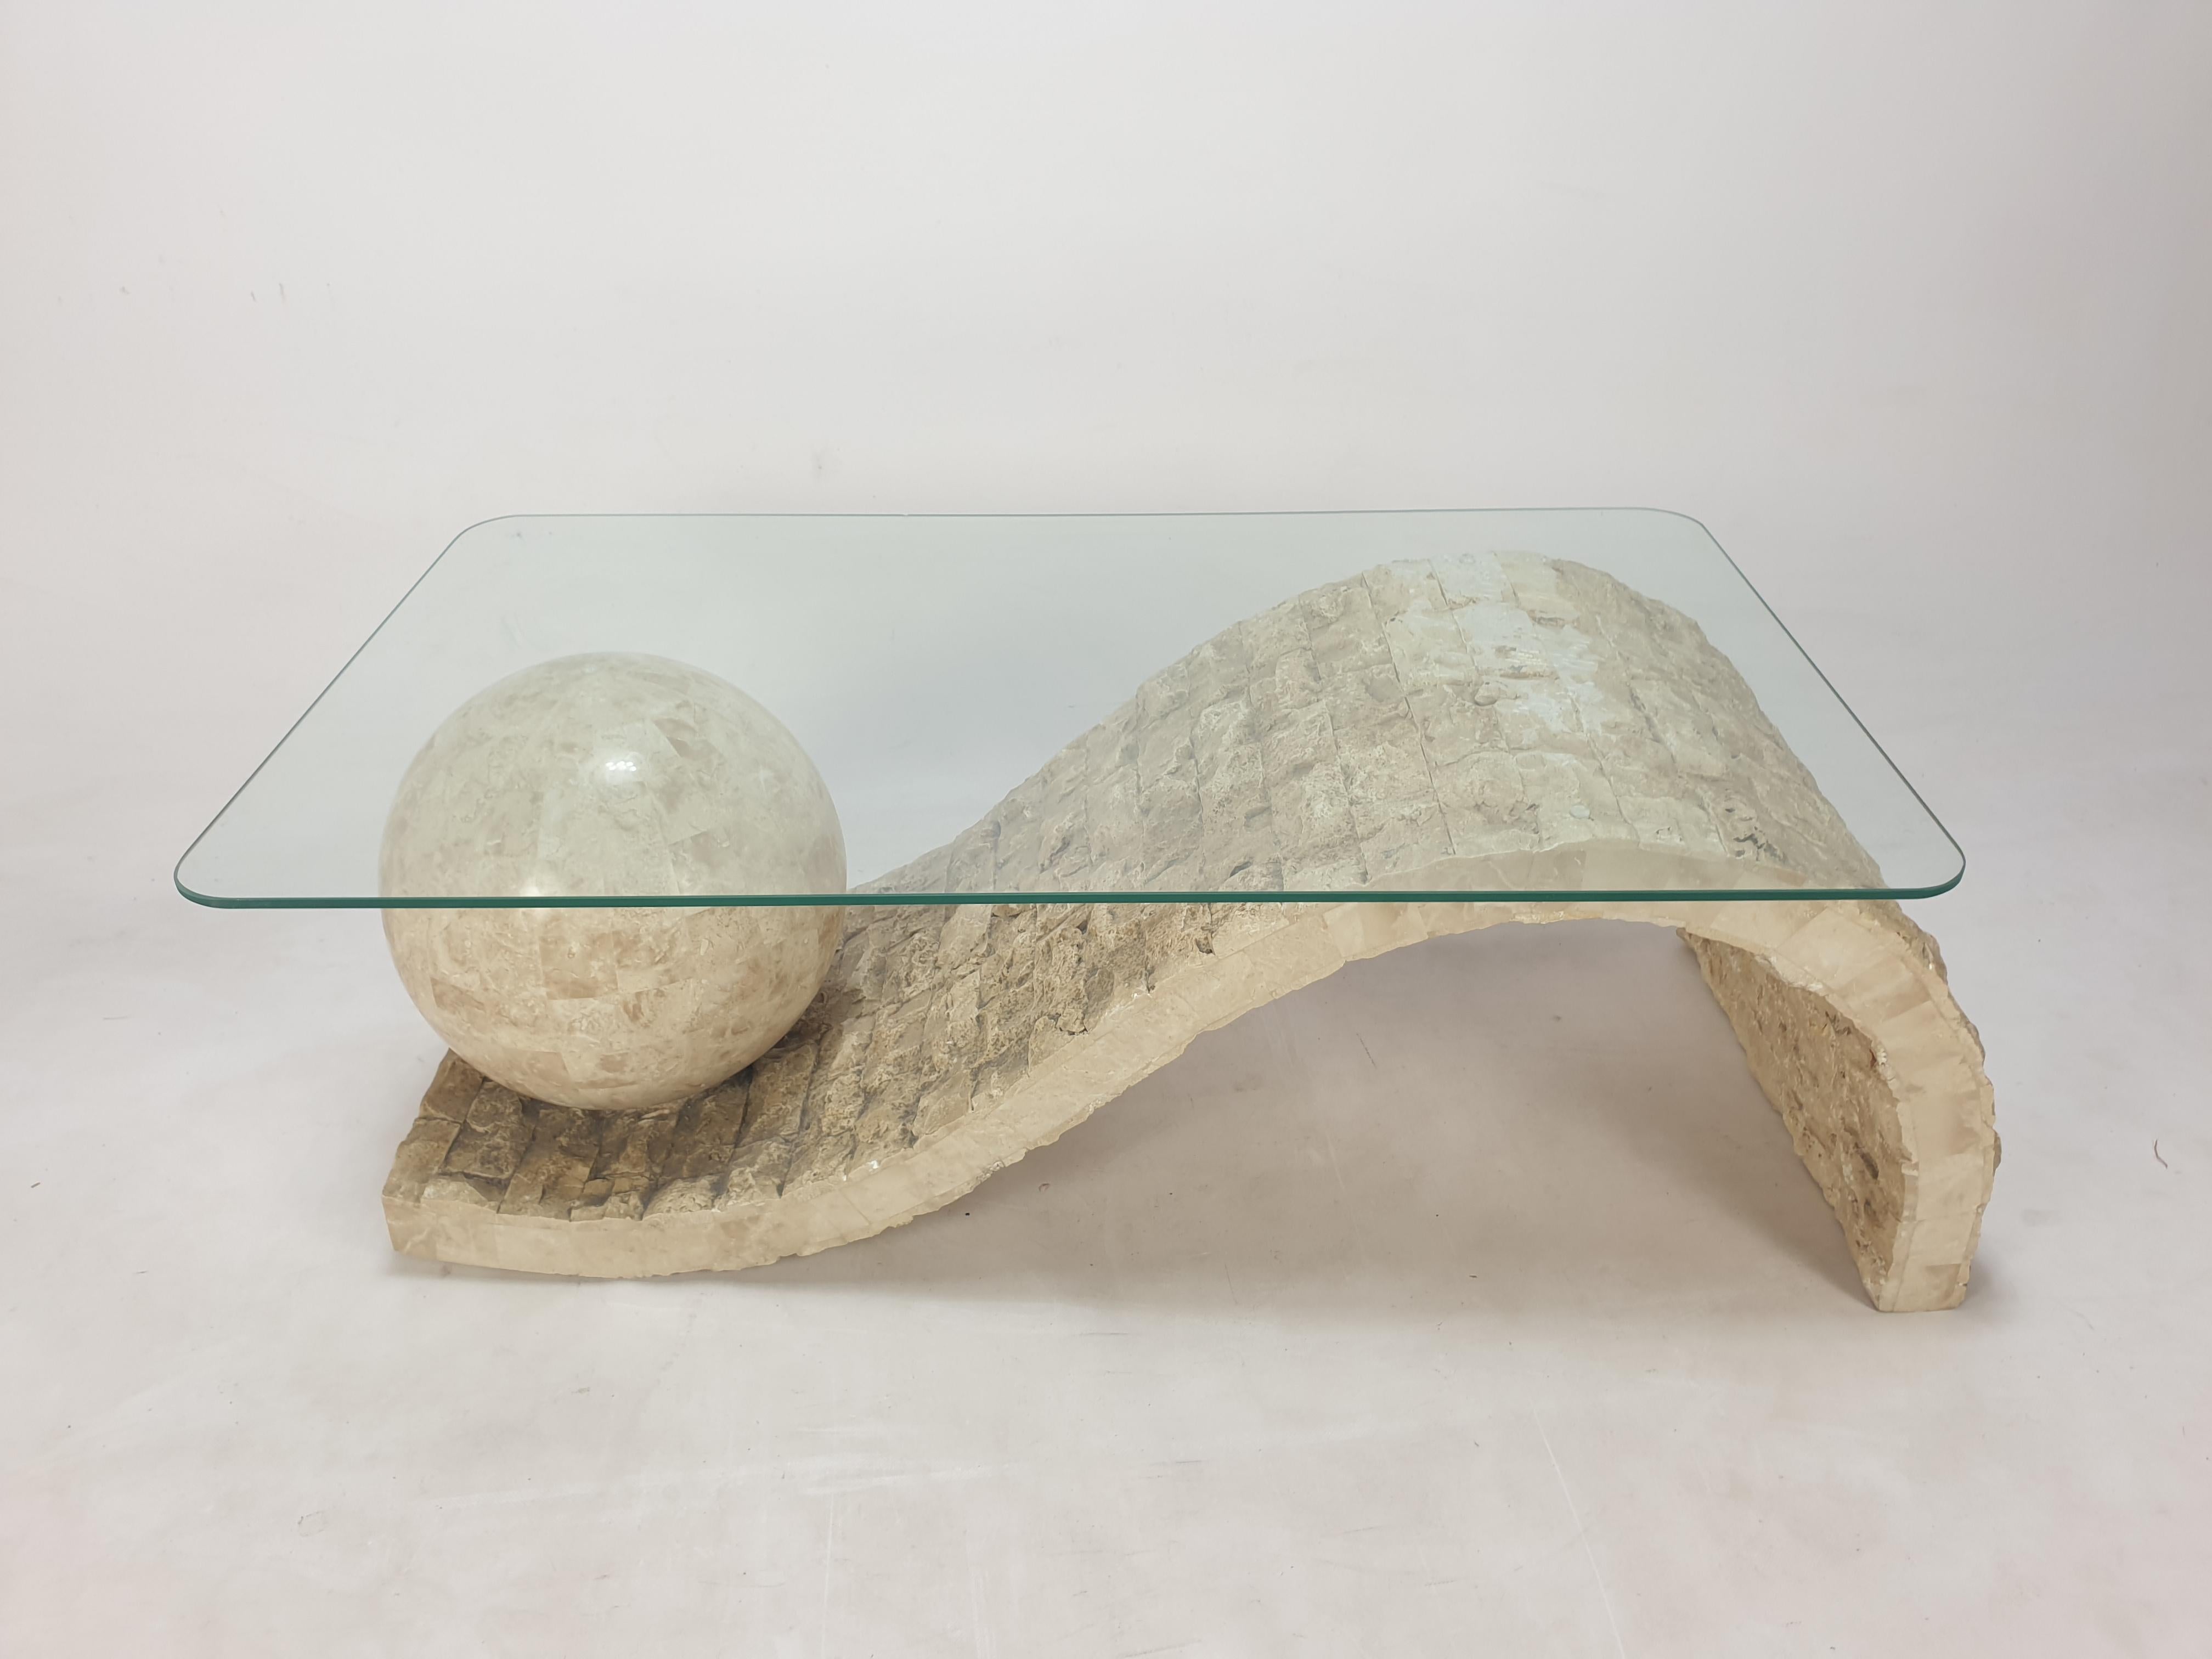 Magnussen Ponte Mactan Stone or Fossil Stone Coffee Table, 1980s In Good Condition For Sale In Oud Beijerland, NL